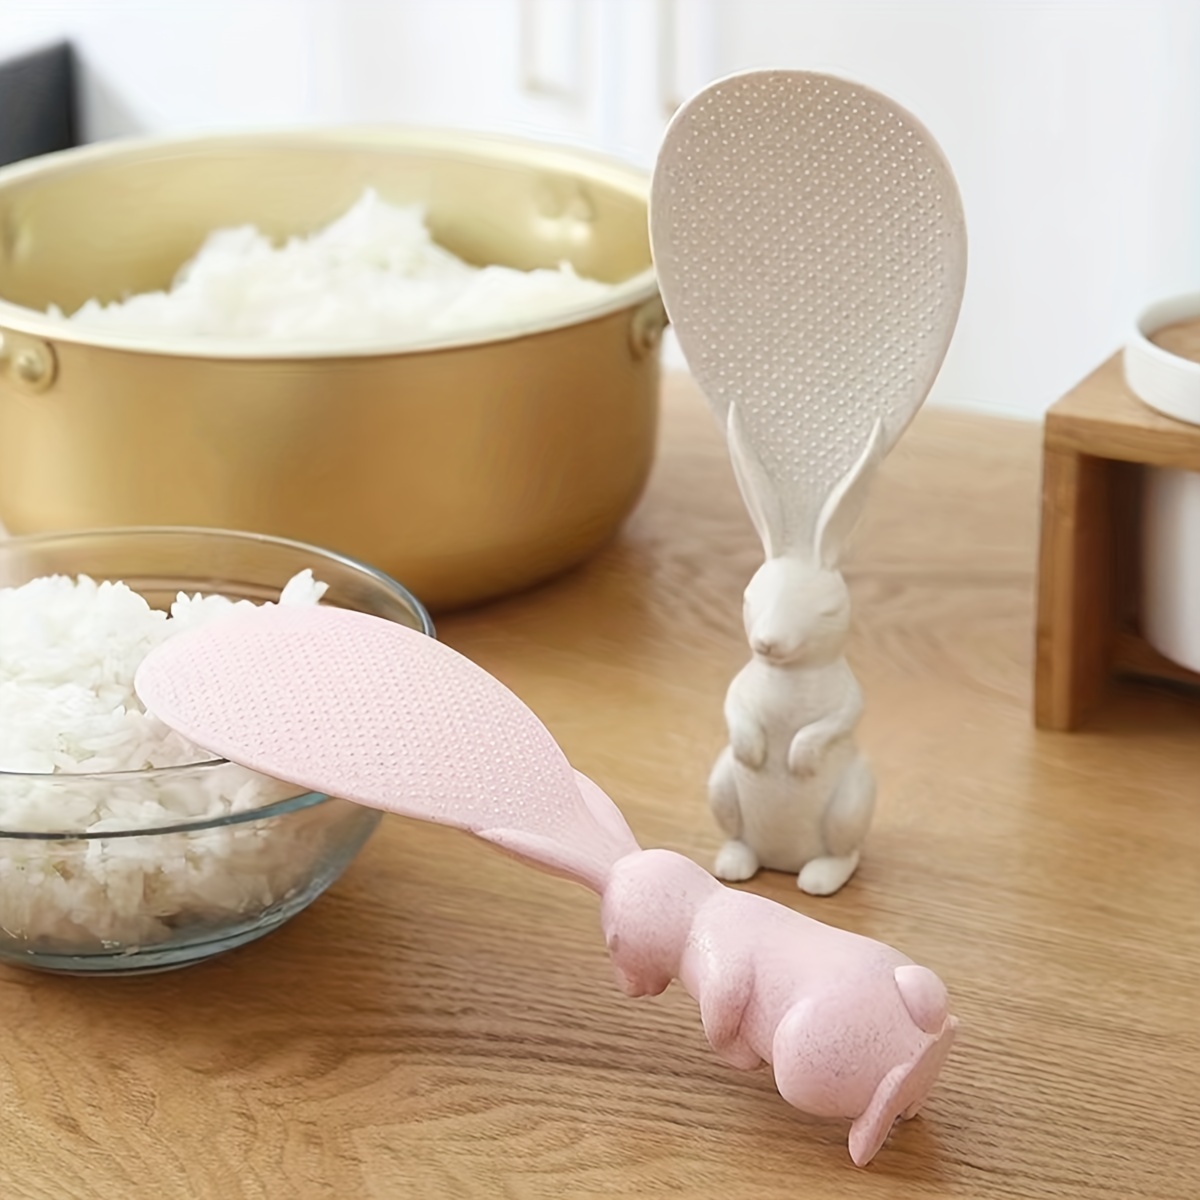 Rice Spoon Stand, Cute Kitchen Gadgets, Kitchen Rice Spoon